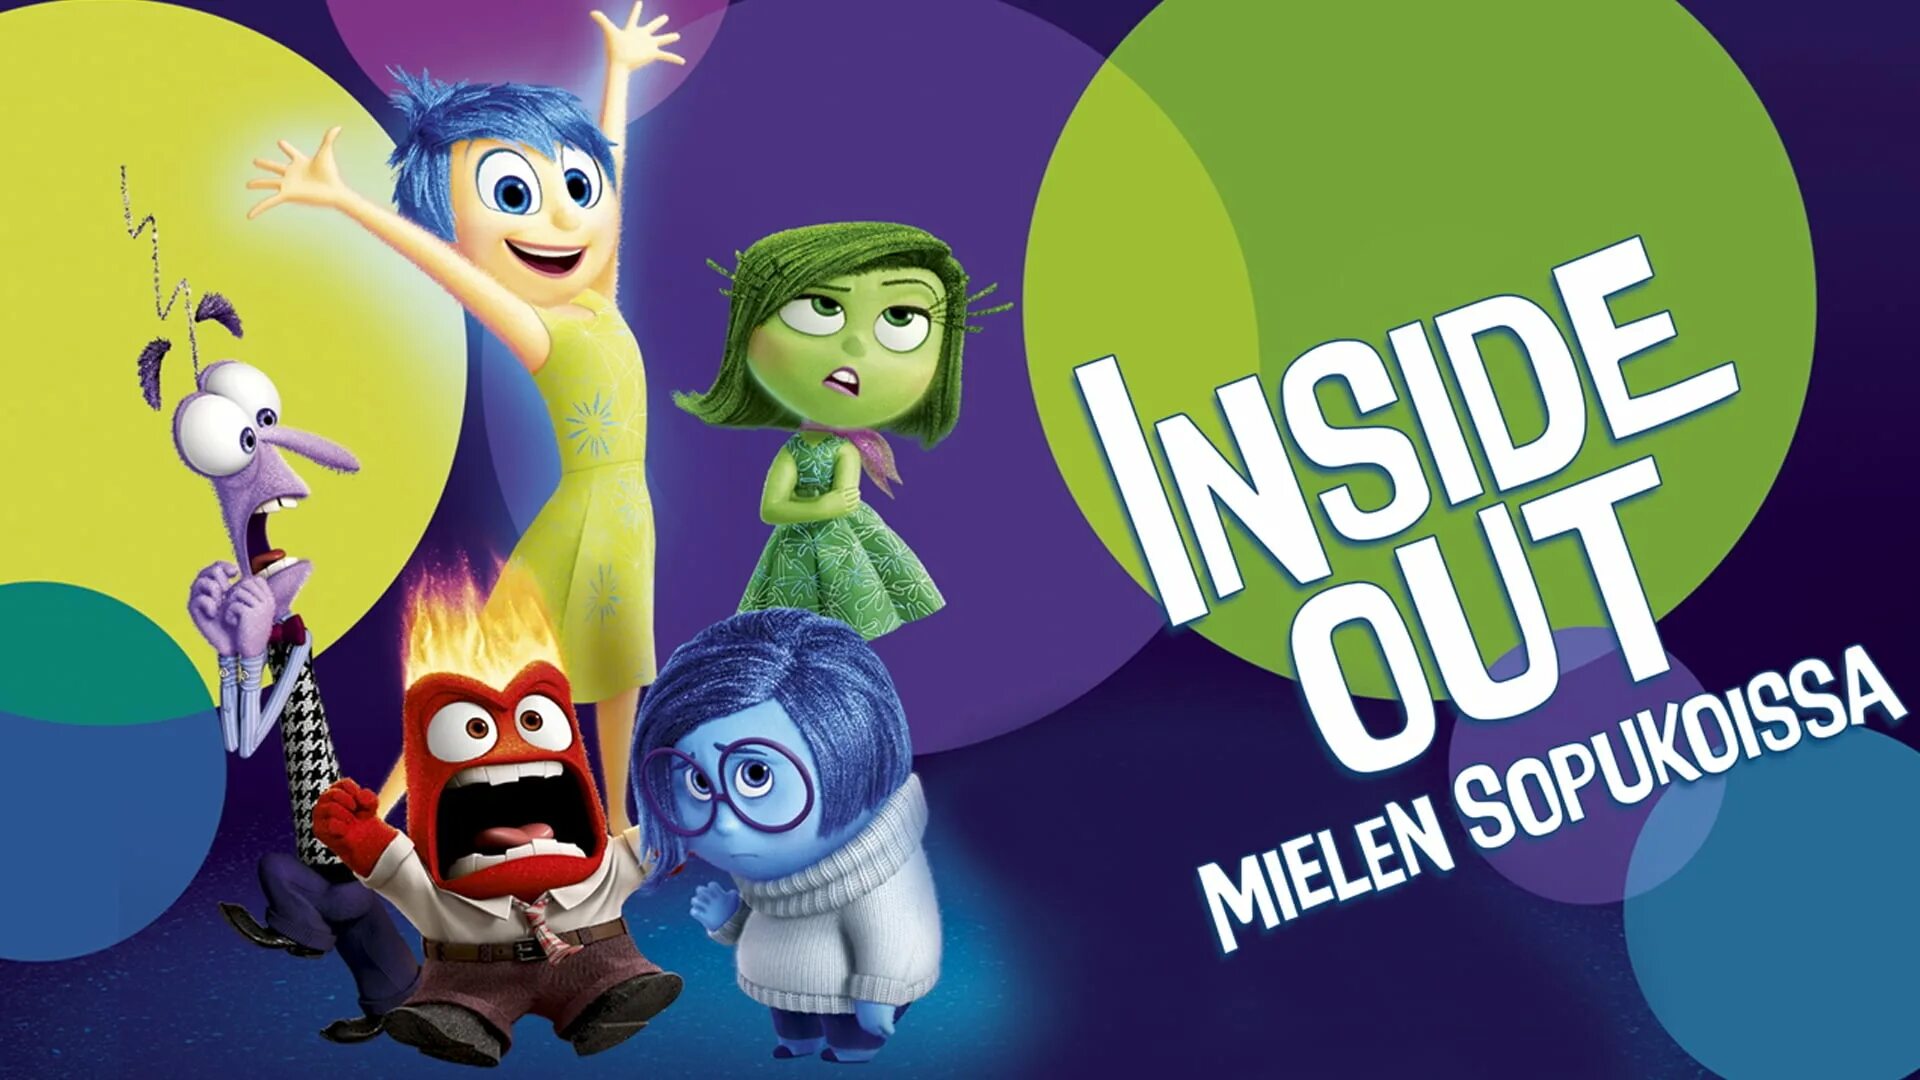 Inside out 2015 poster. Головоломка. Inside out Постер. Головоломка 2015 Постер.